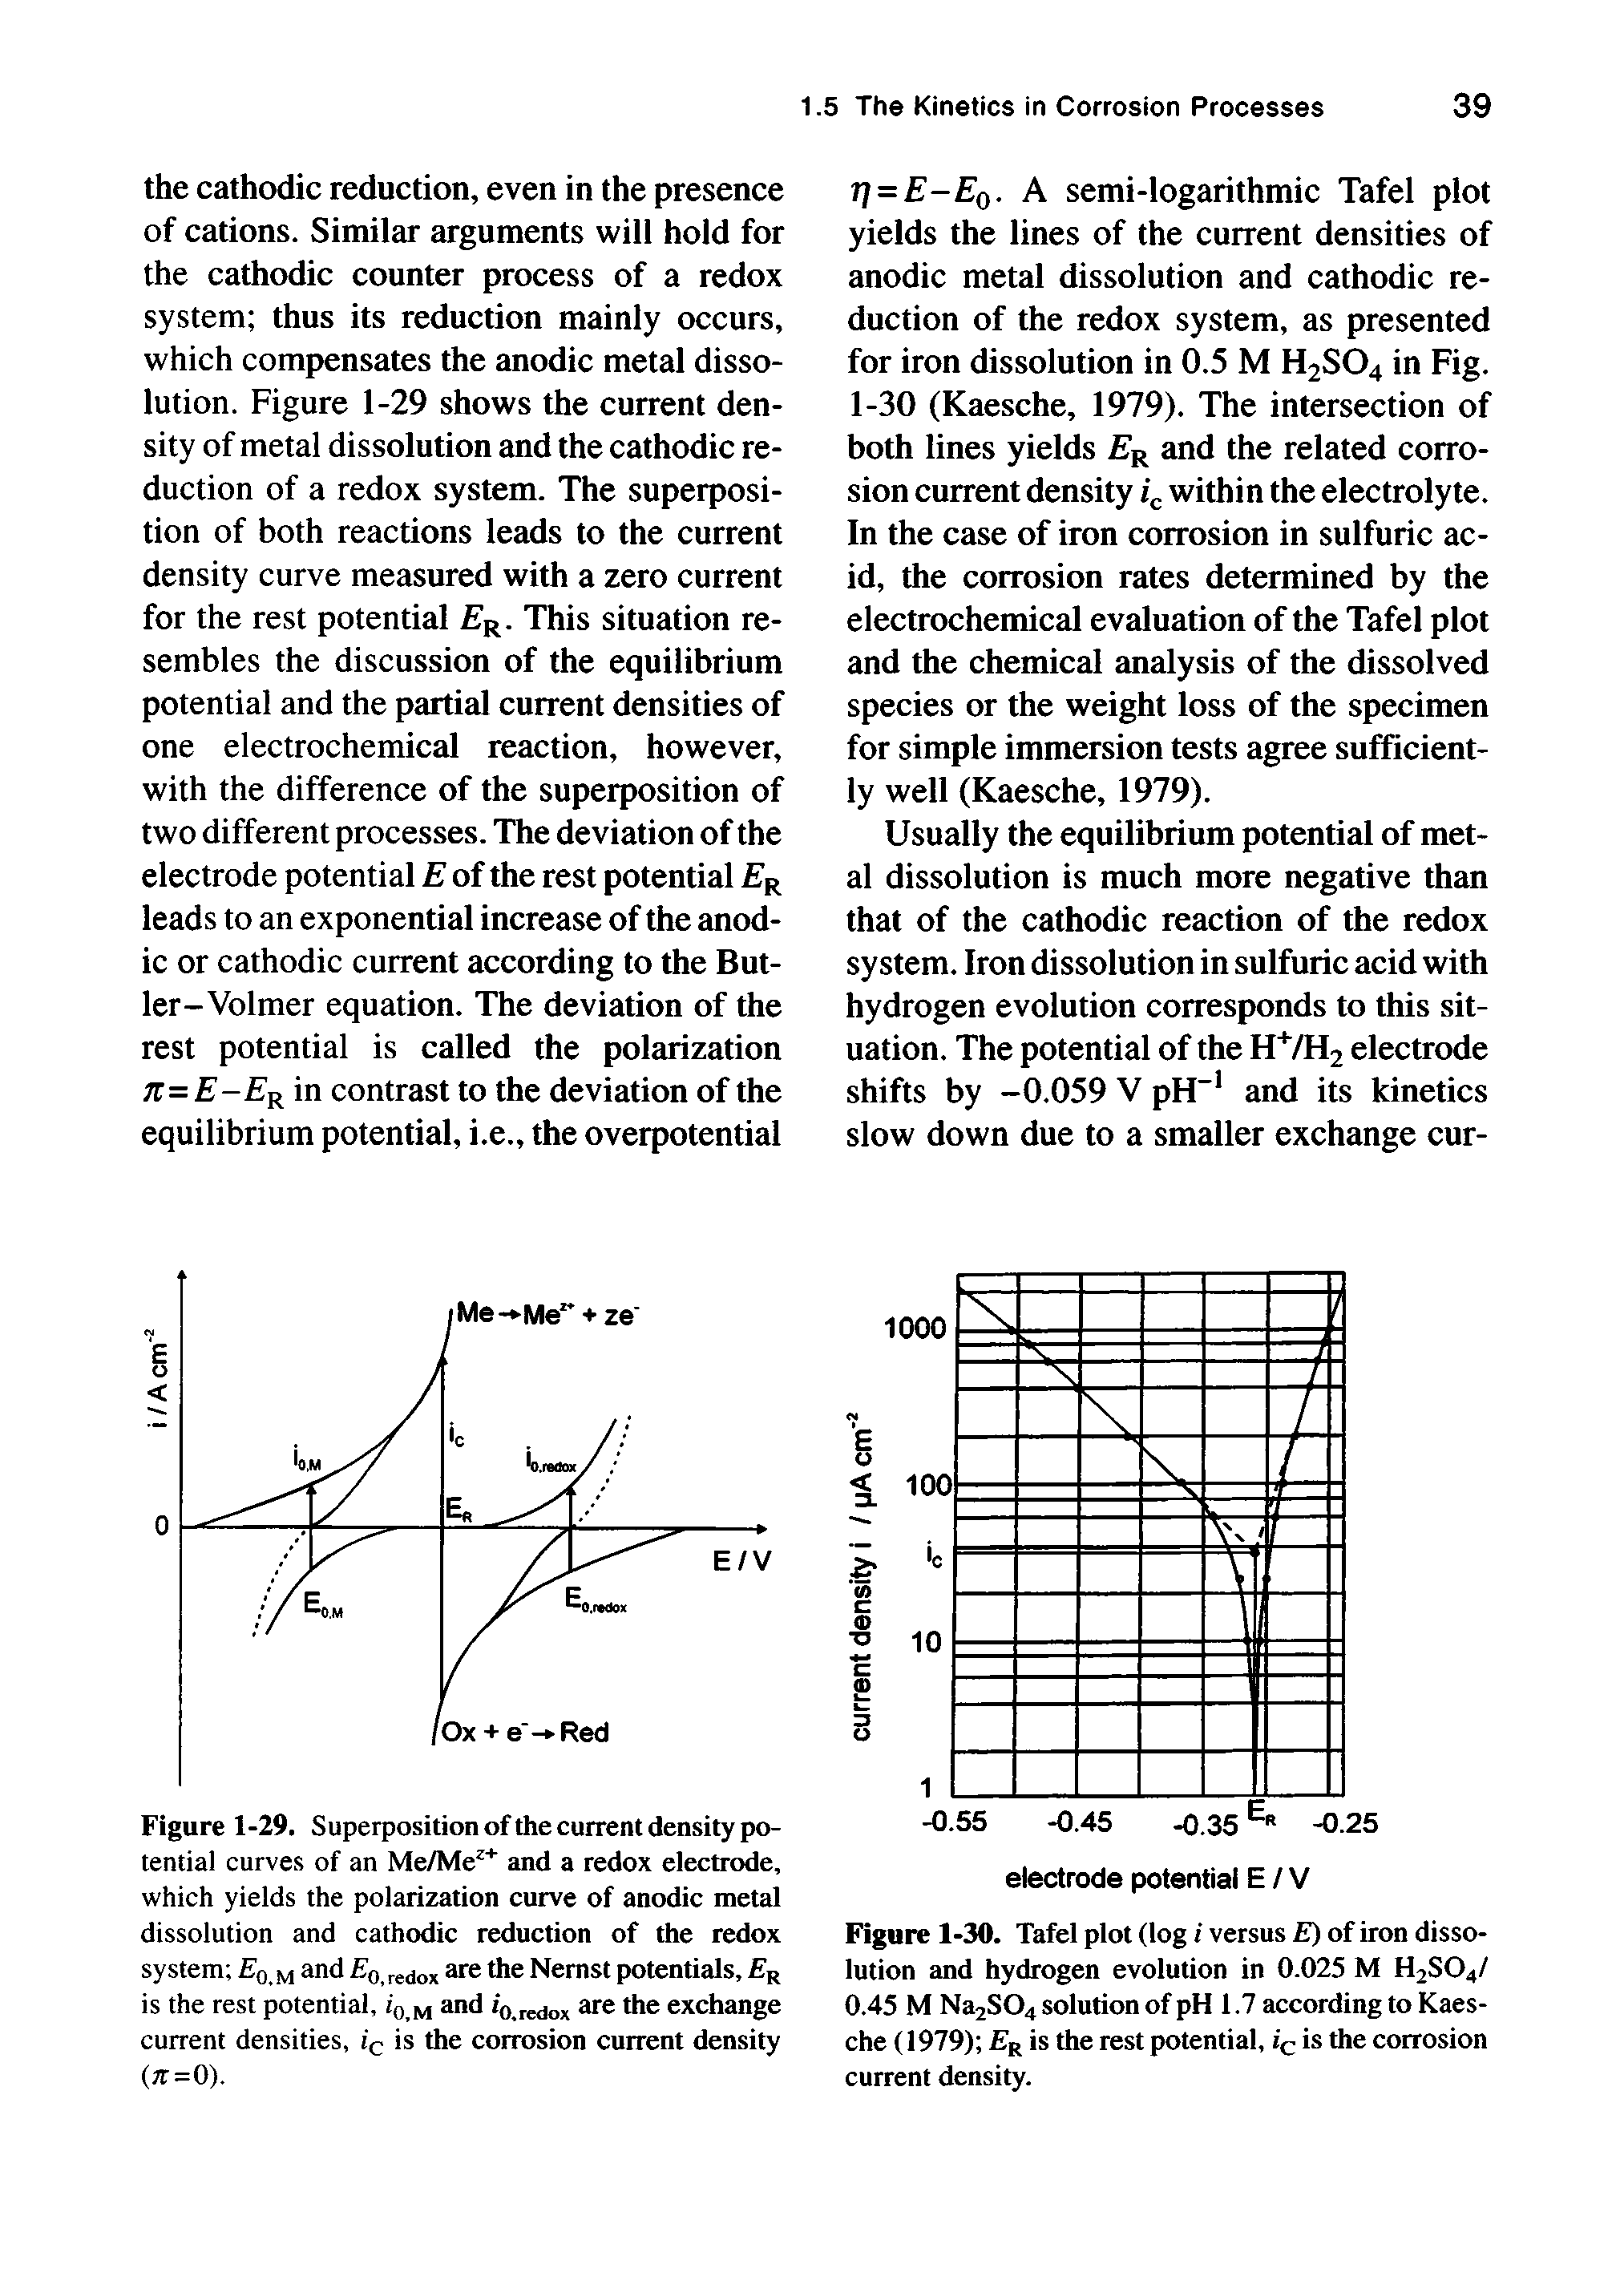 Figure 1-29. Superposition of the current density potential curves of an Me/Me " and a redox electrode, which yields the polarization curve of anodic metal dissolution and cathodic reduction of the redox system Eq.m nd Fq, redox t Nernst potentials, r is the rest potential, i o,m <o.redox the exchange current densities, I c is the corrosion current density ( r=0).